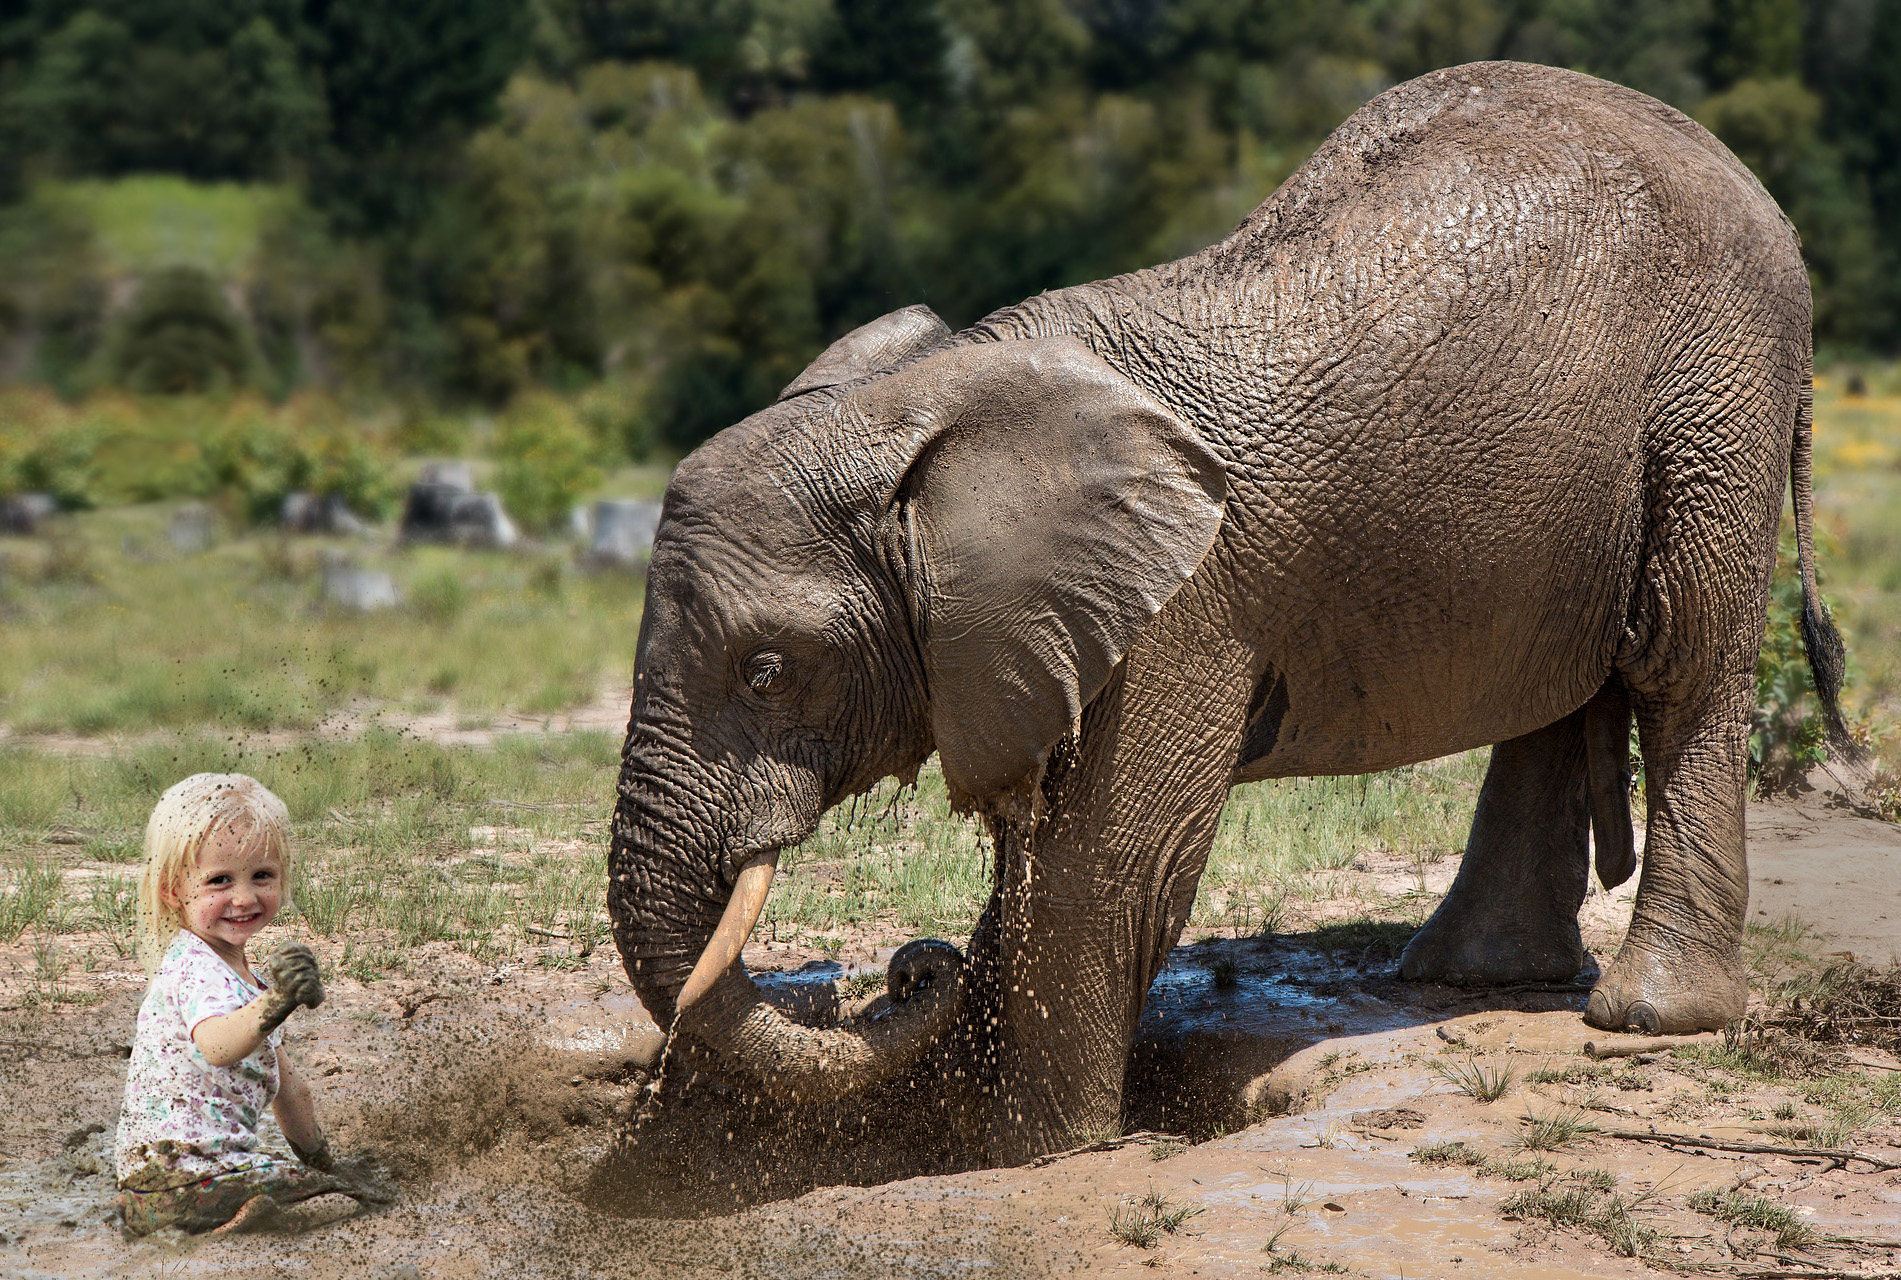 playing in the dirt with Elephant